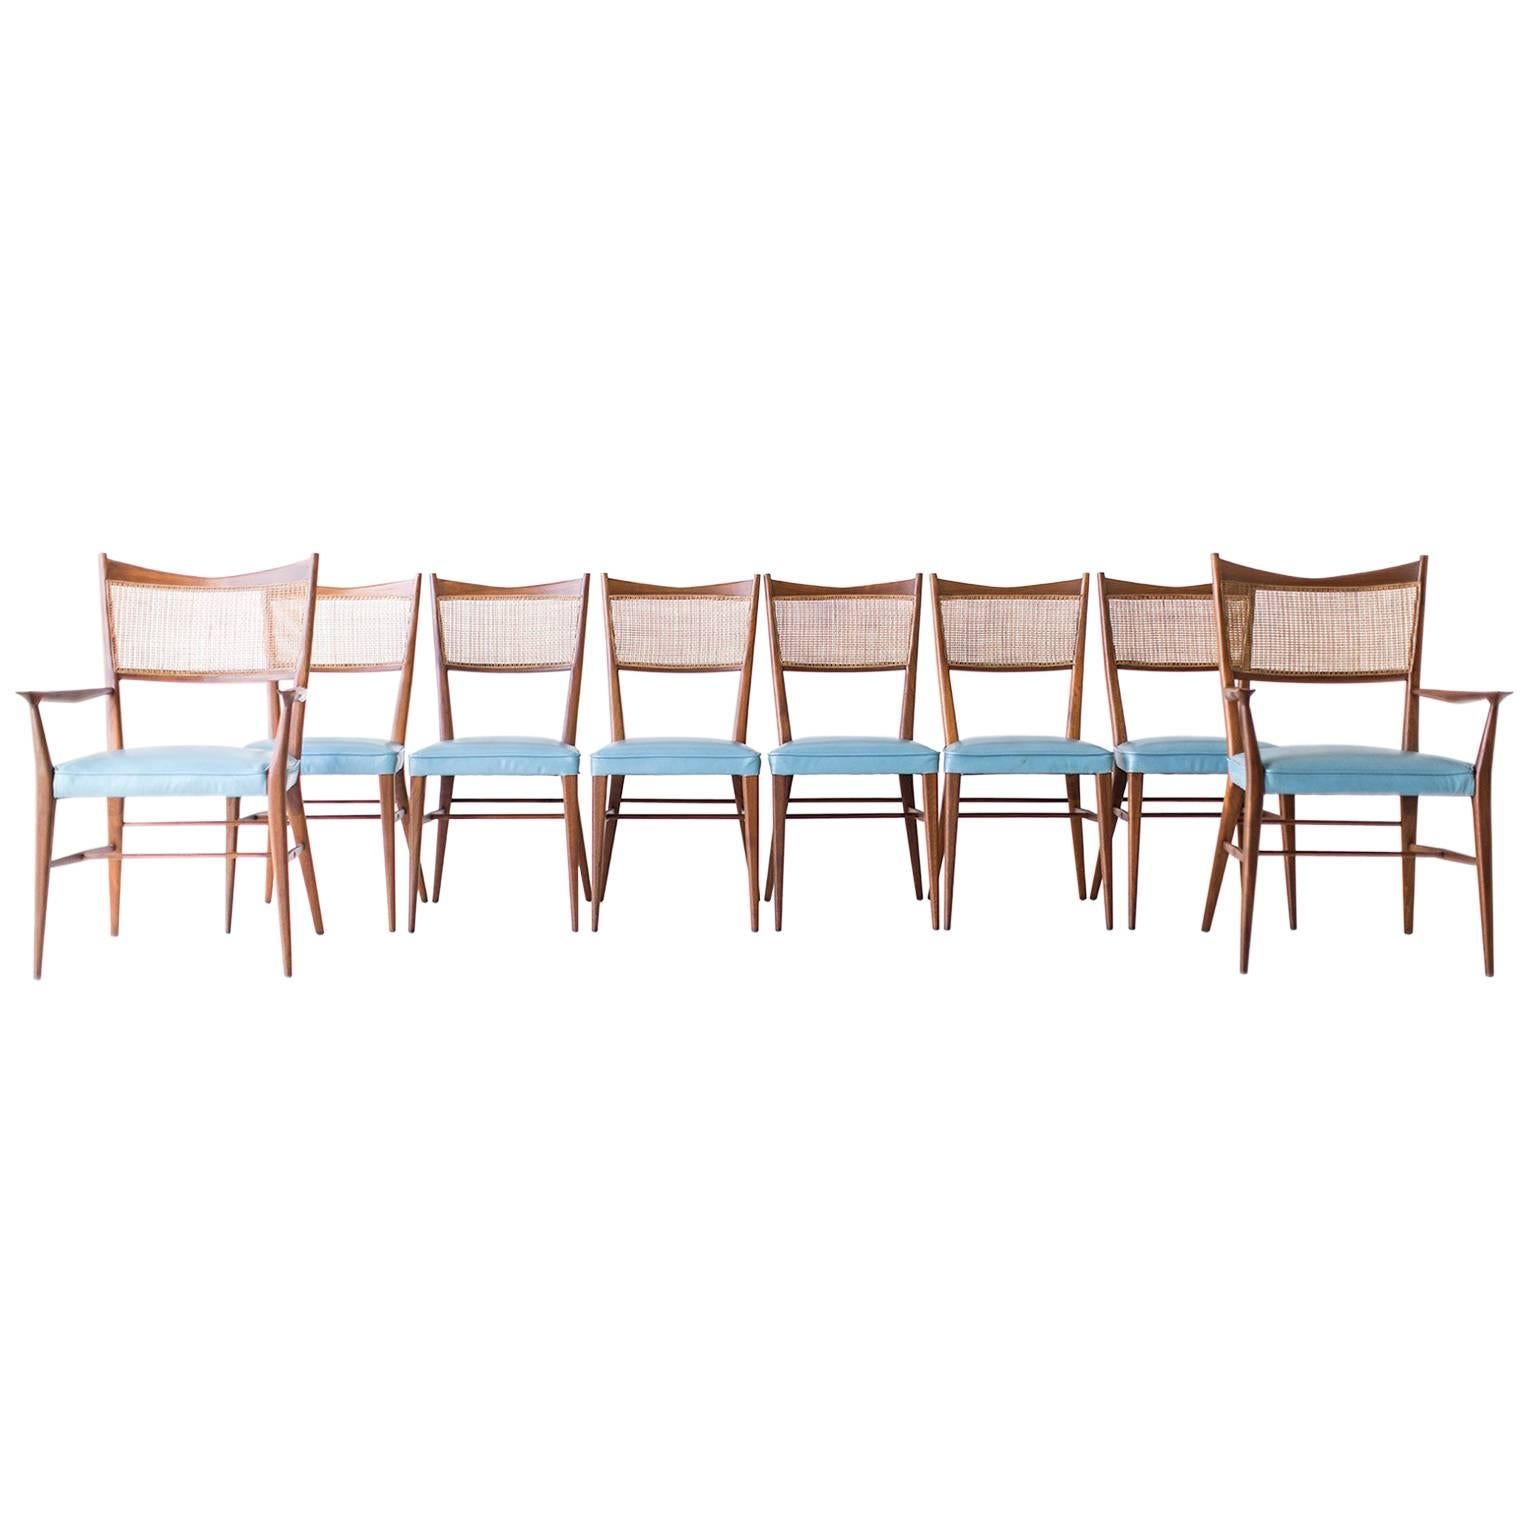 Paul McCobb Dining Chairs for H Sacks & Sons, Connoisseur Collection